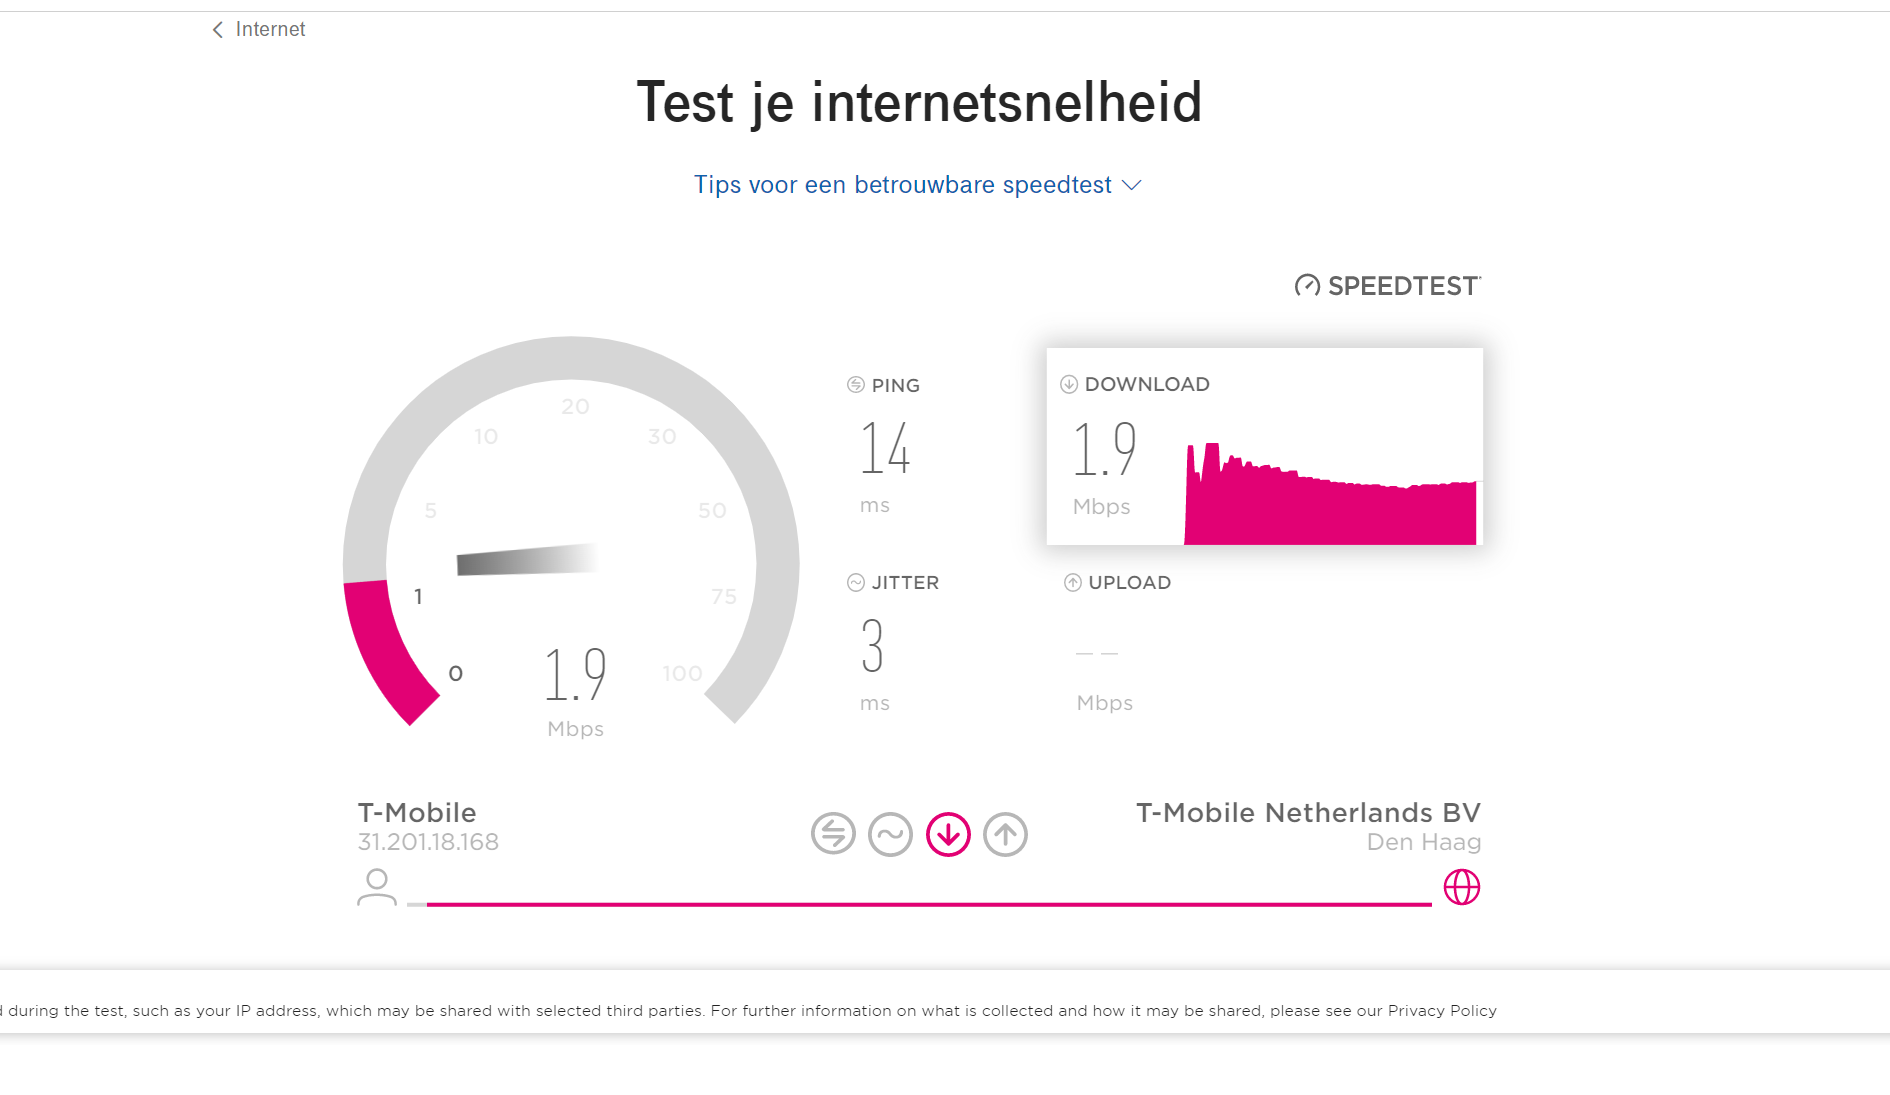 Internet download speed around 2,5 Mbps | T-Mobile Community